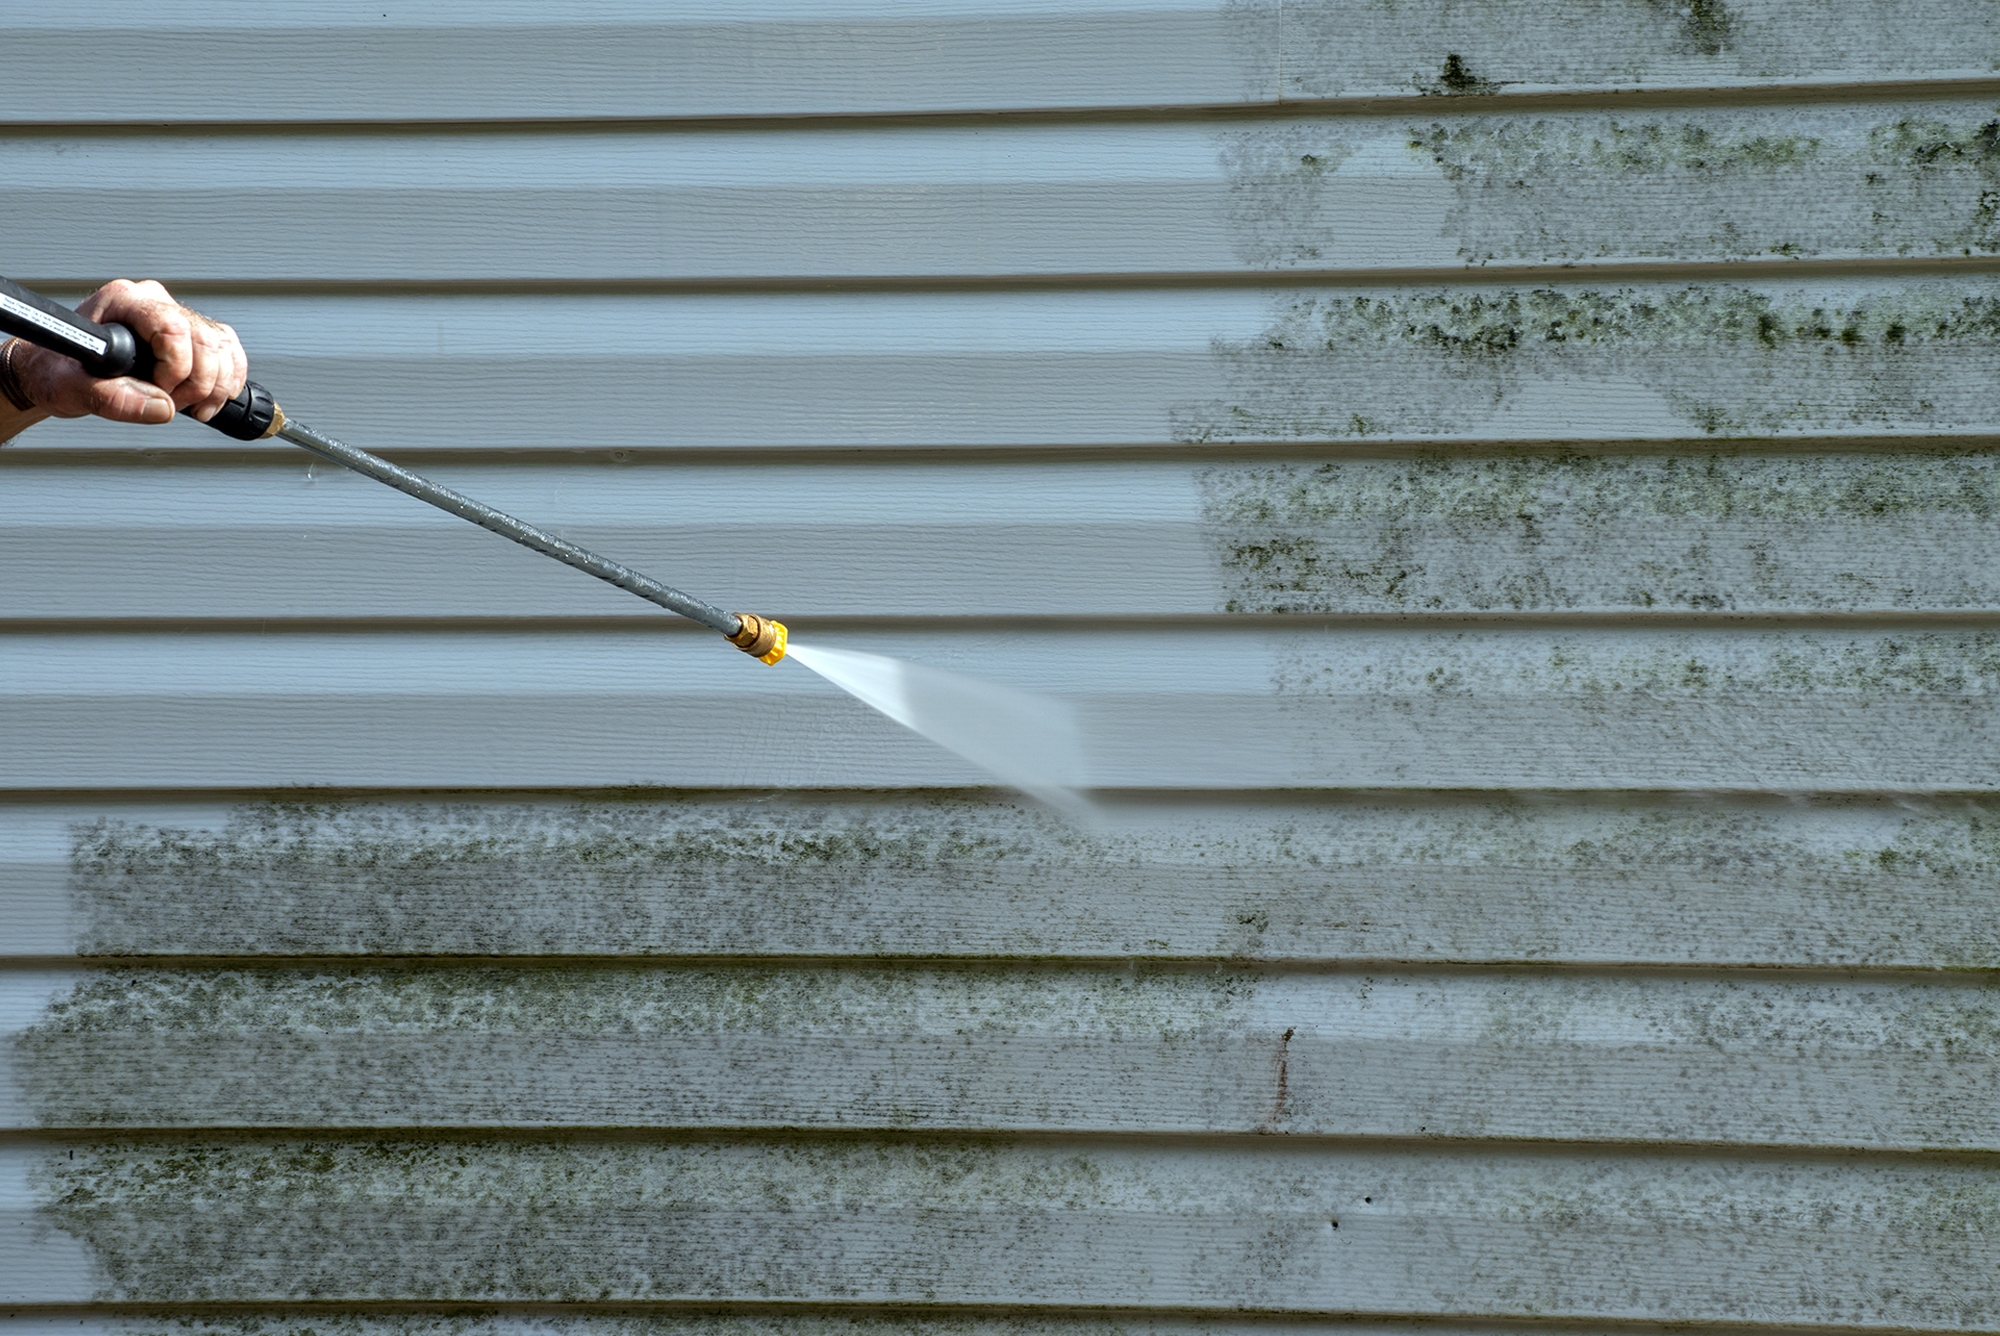 Pressure Washing Services Near Me